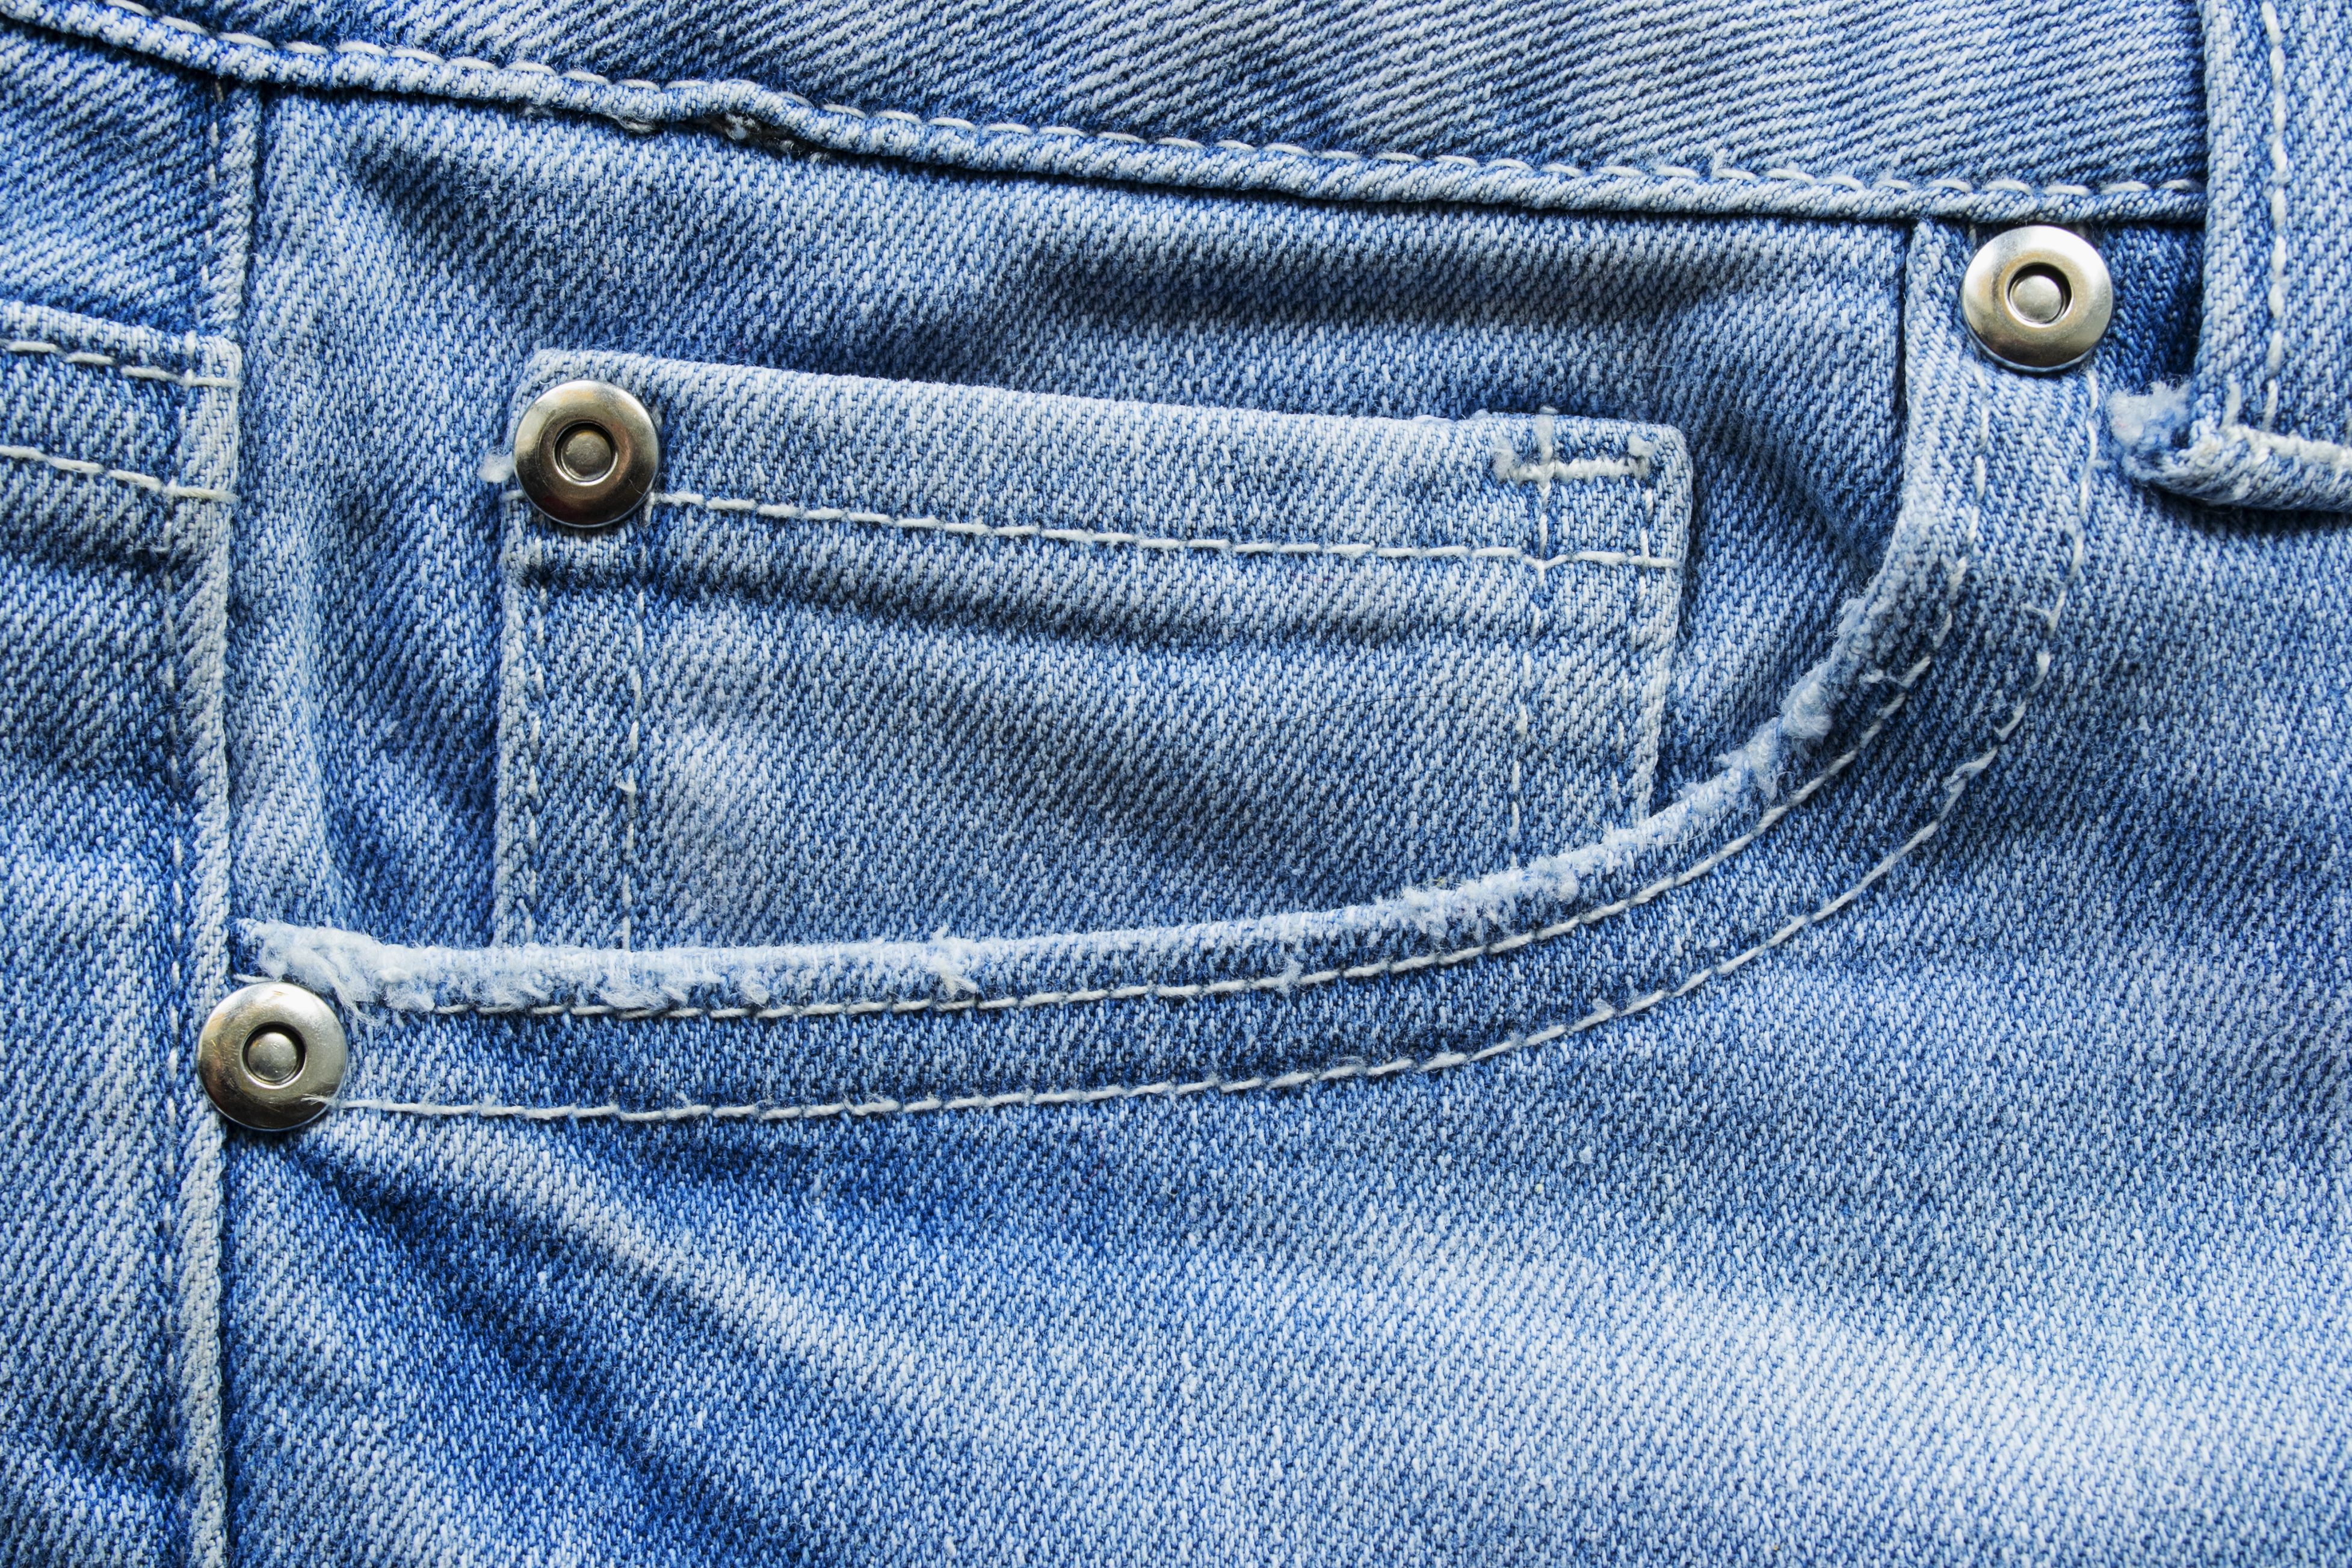 You know those metal rivets on your jeans? They could be going